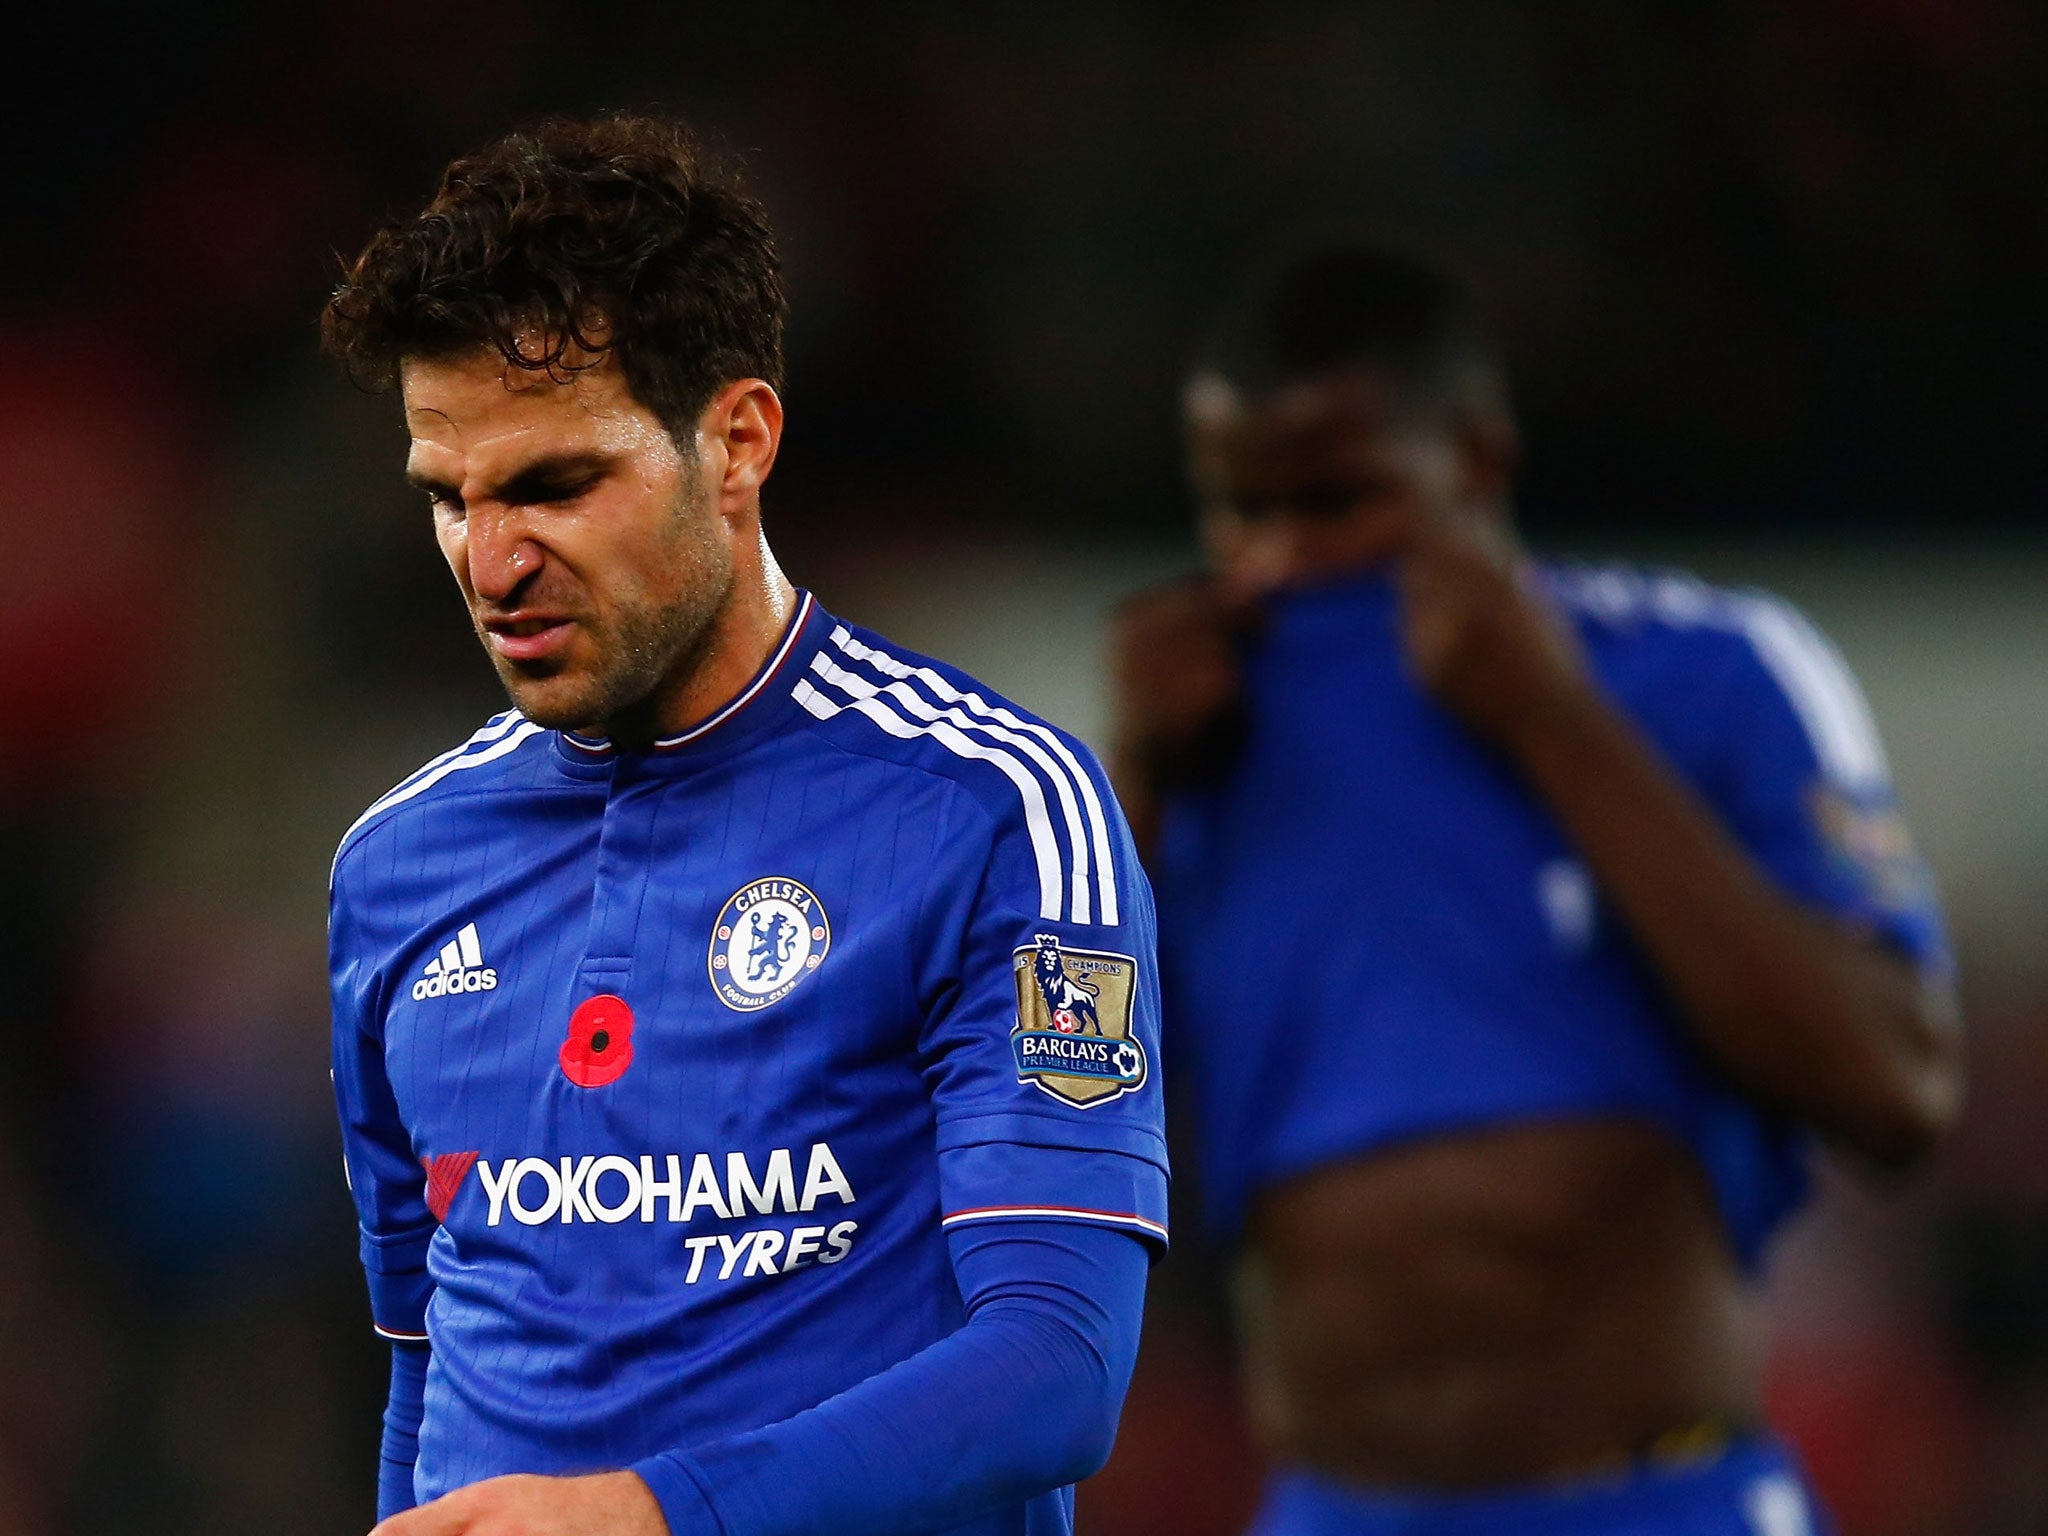 Chelsea midfielder Cesc Fabregas gave the ball away four times in 24 minutes in the loss to Stoke